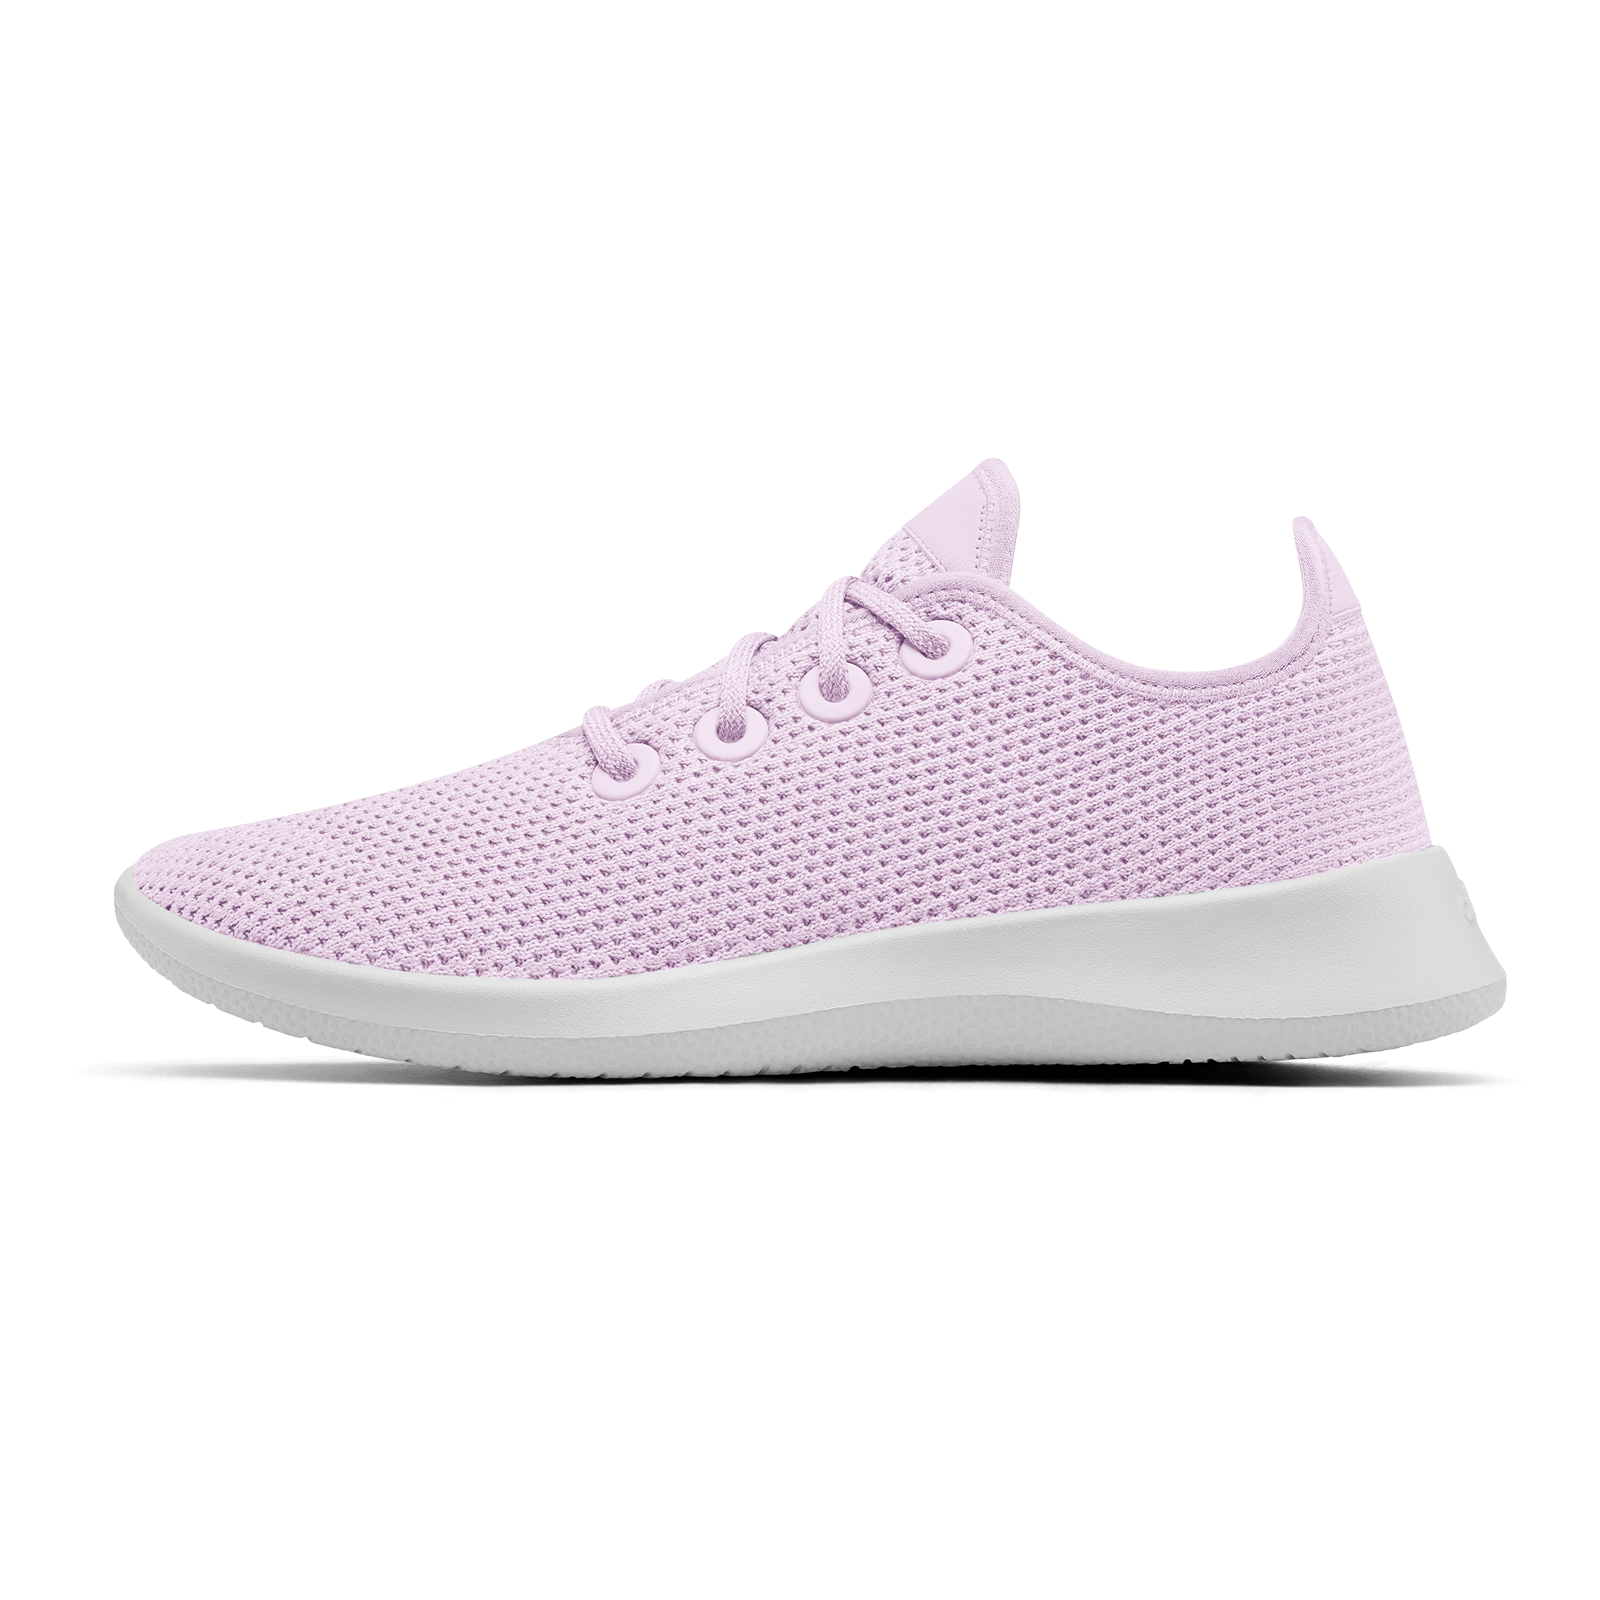 Men's Tree Runners - Lilac (White Sole)